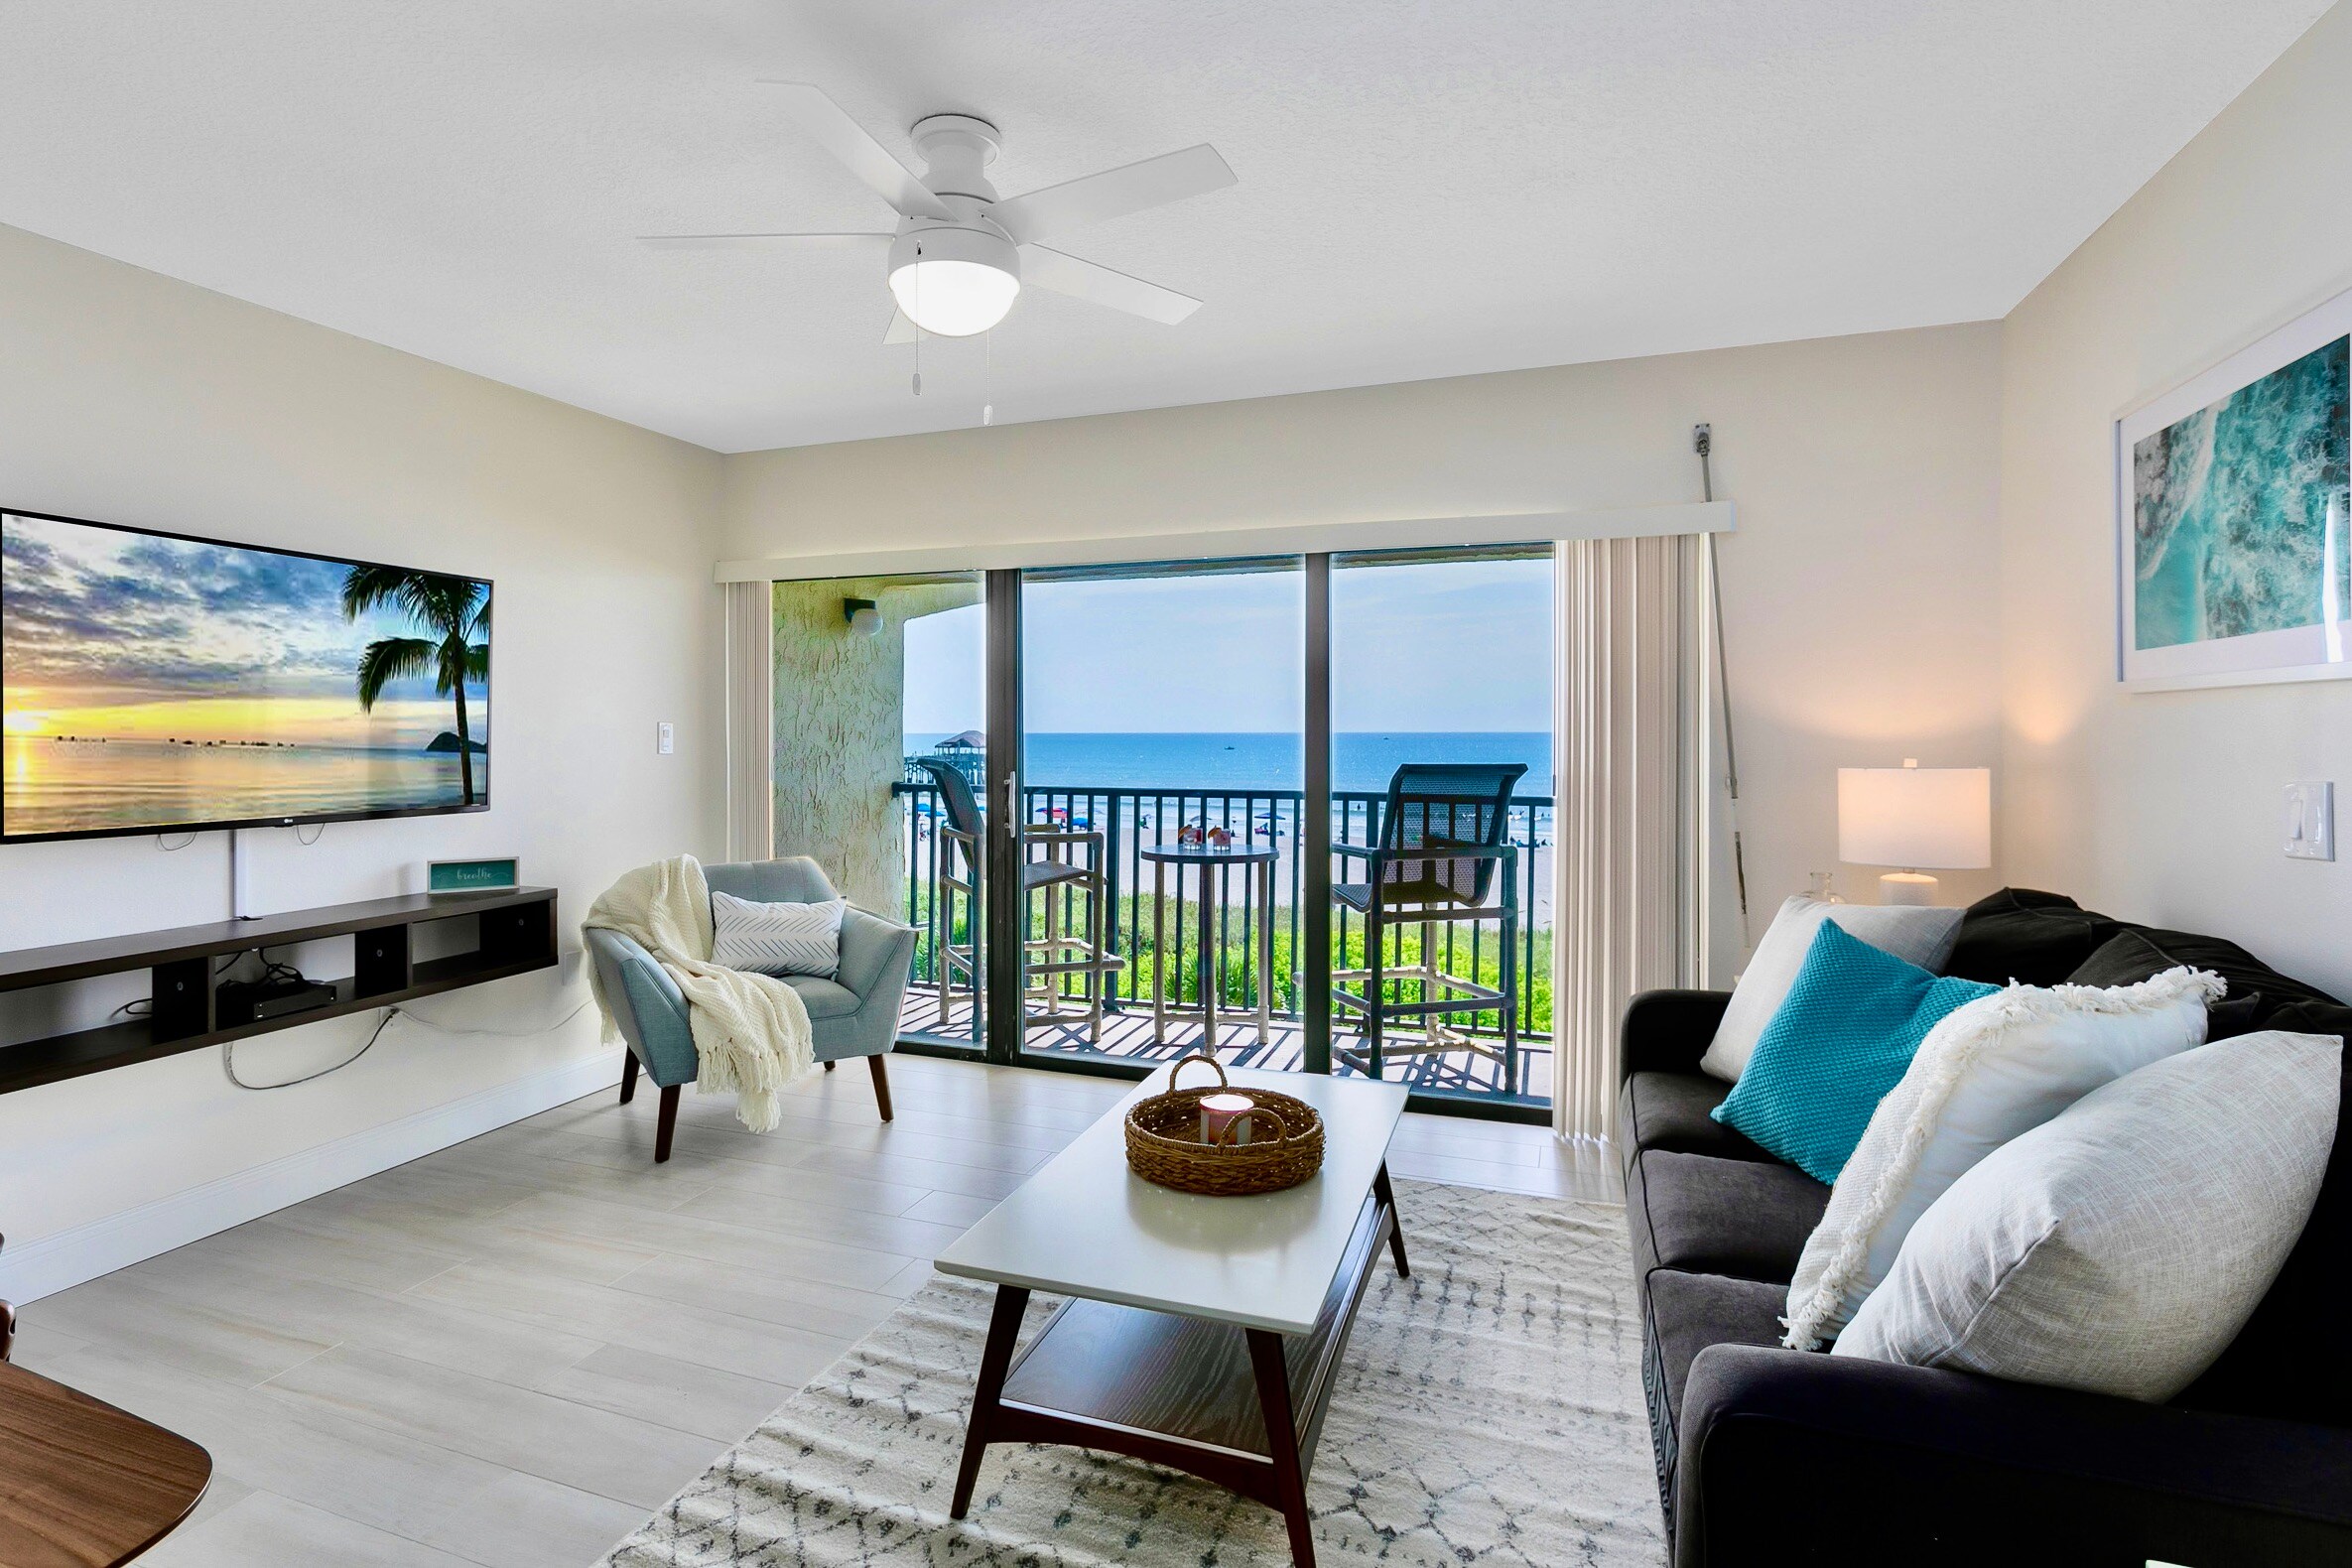 Perfect spot to relax with a view of the ocean and a new 55" flatscreen TV.